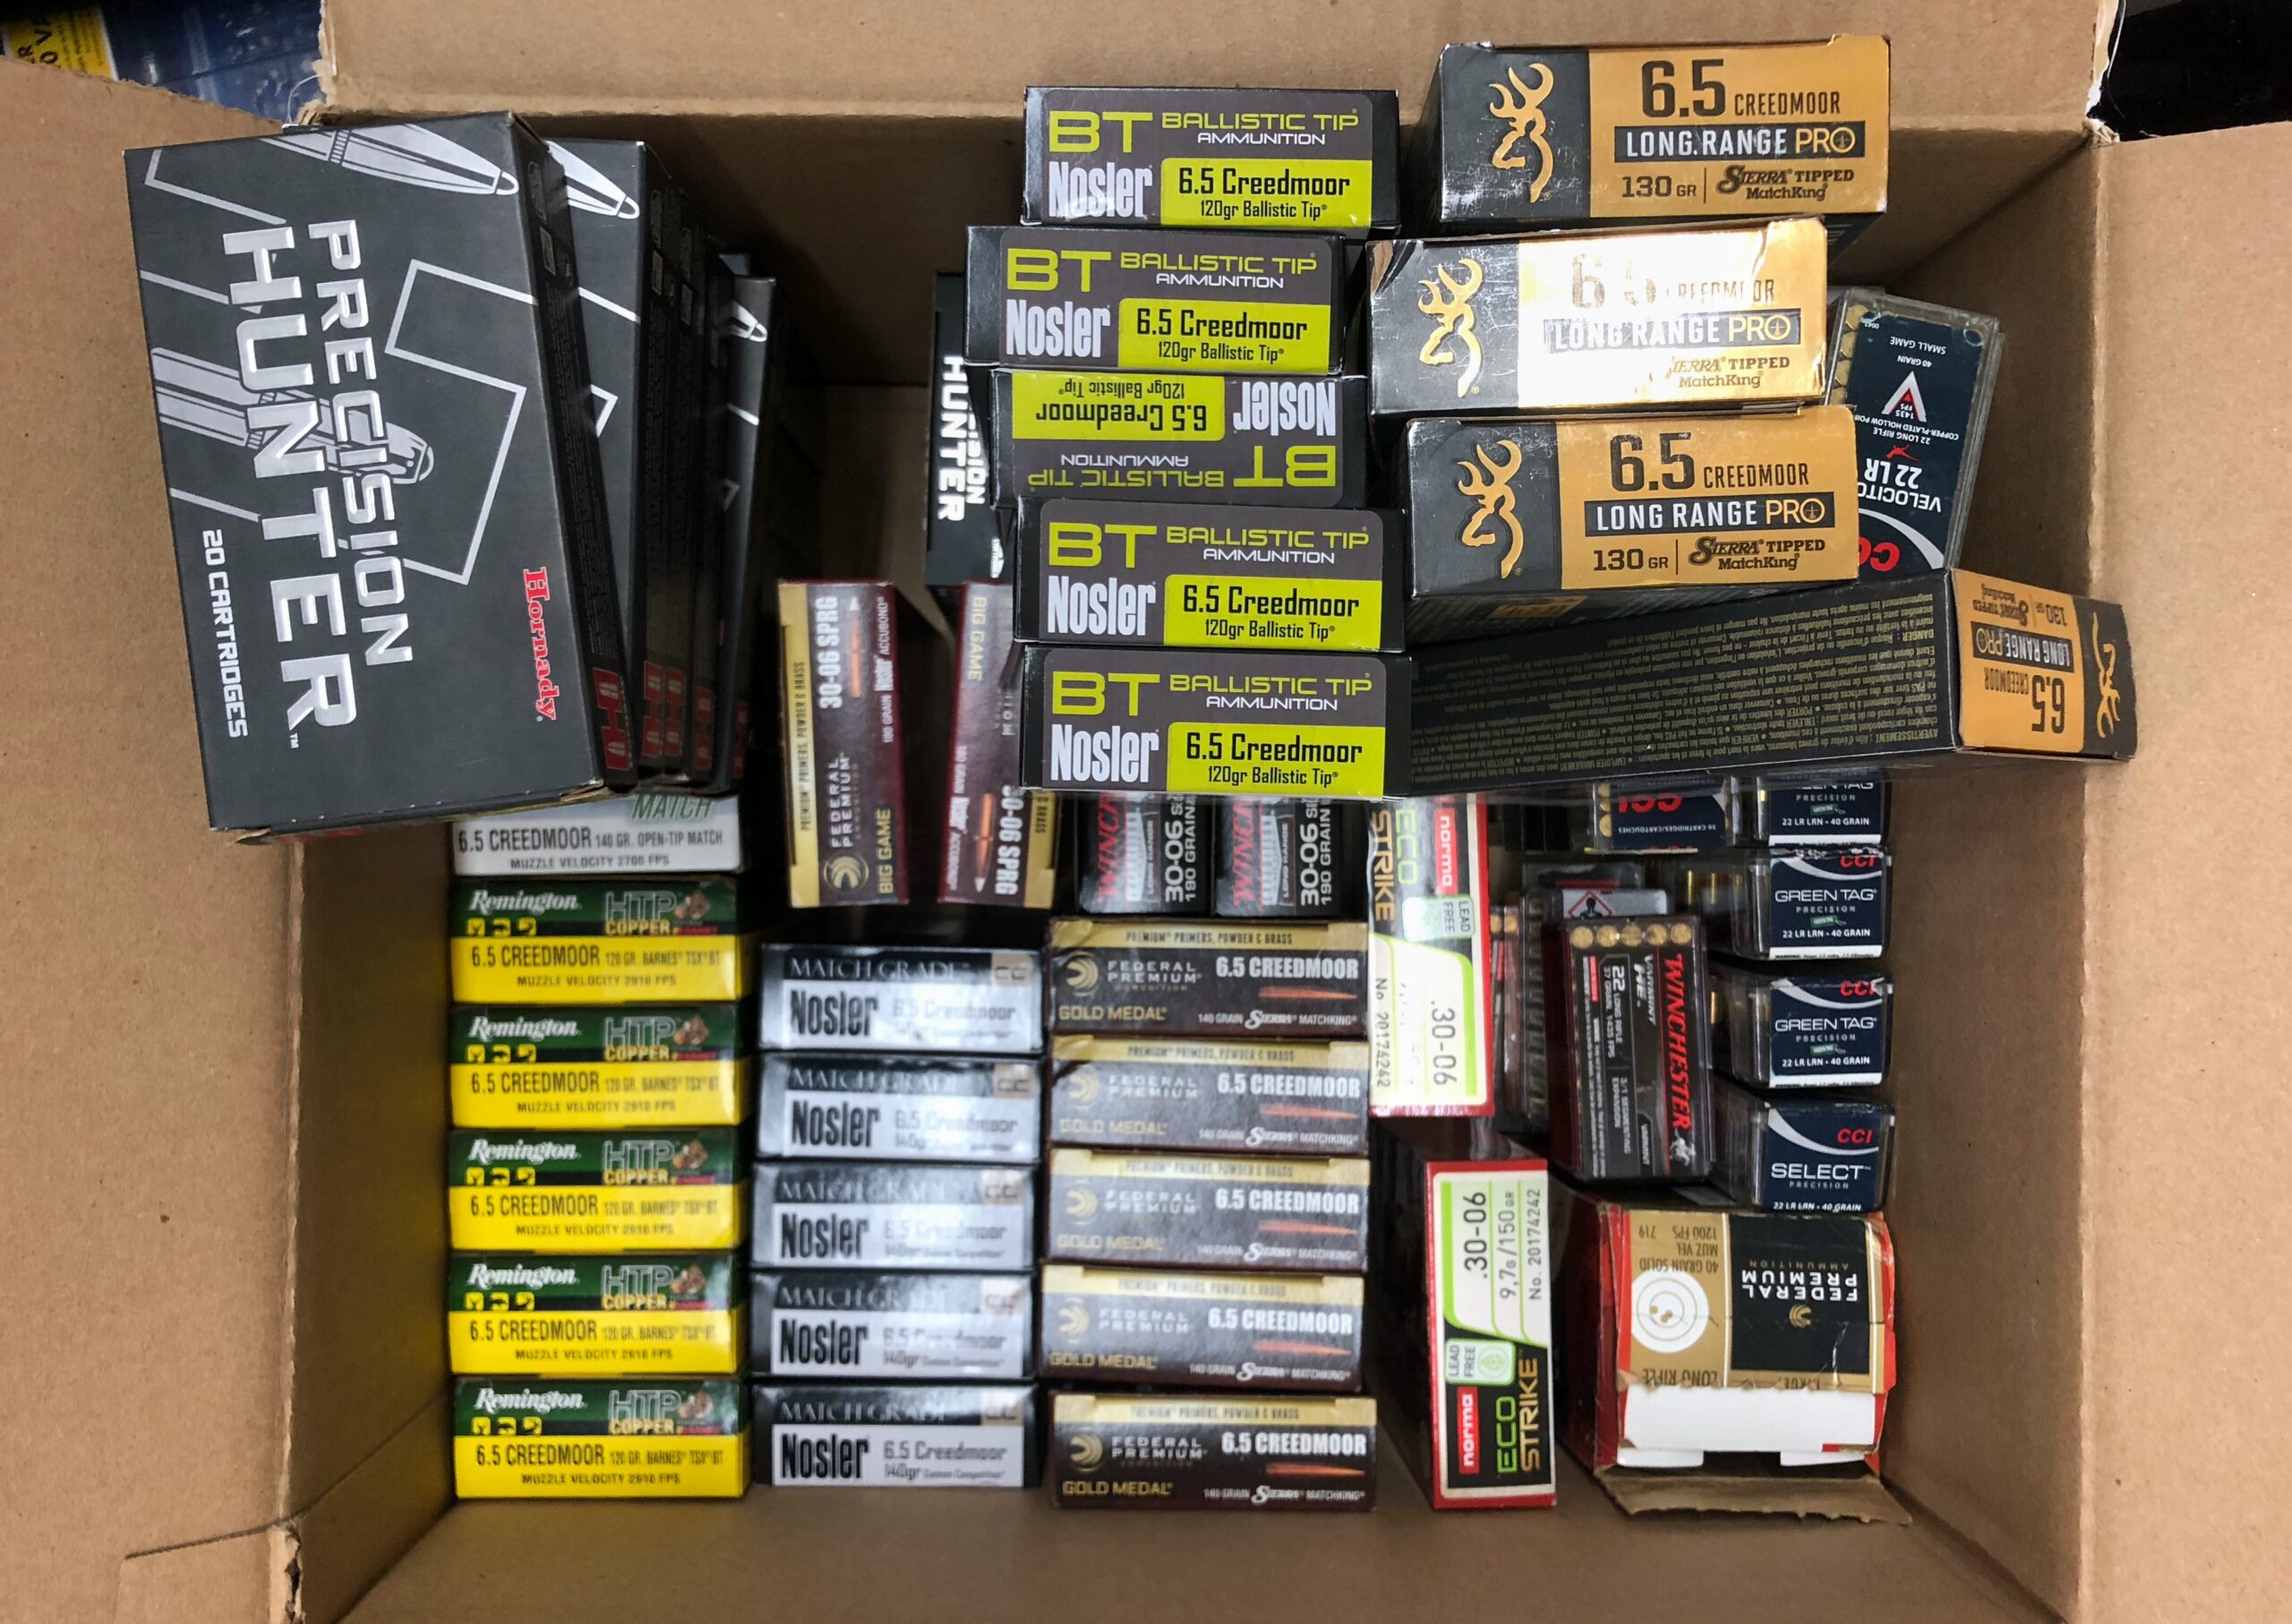 An assorted box of ammunition, which some purchasers are selling back to retailers.